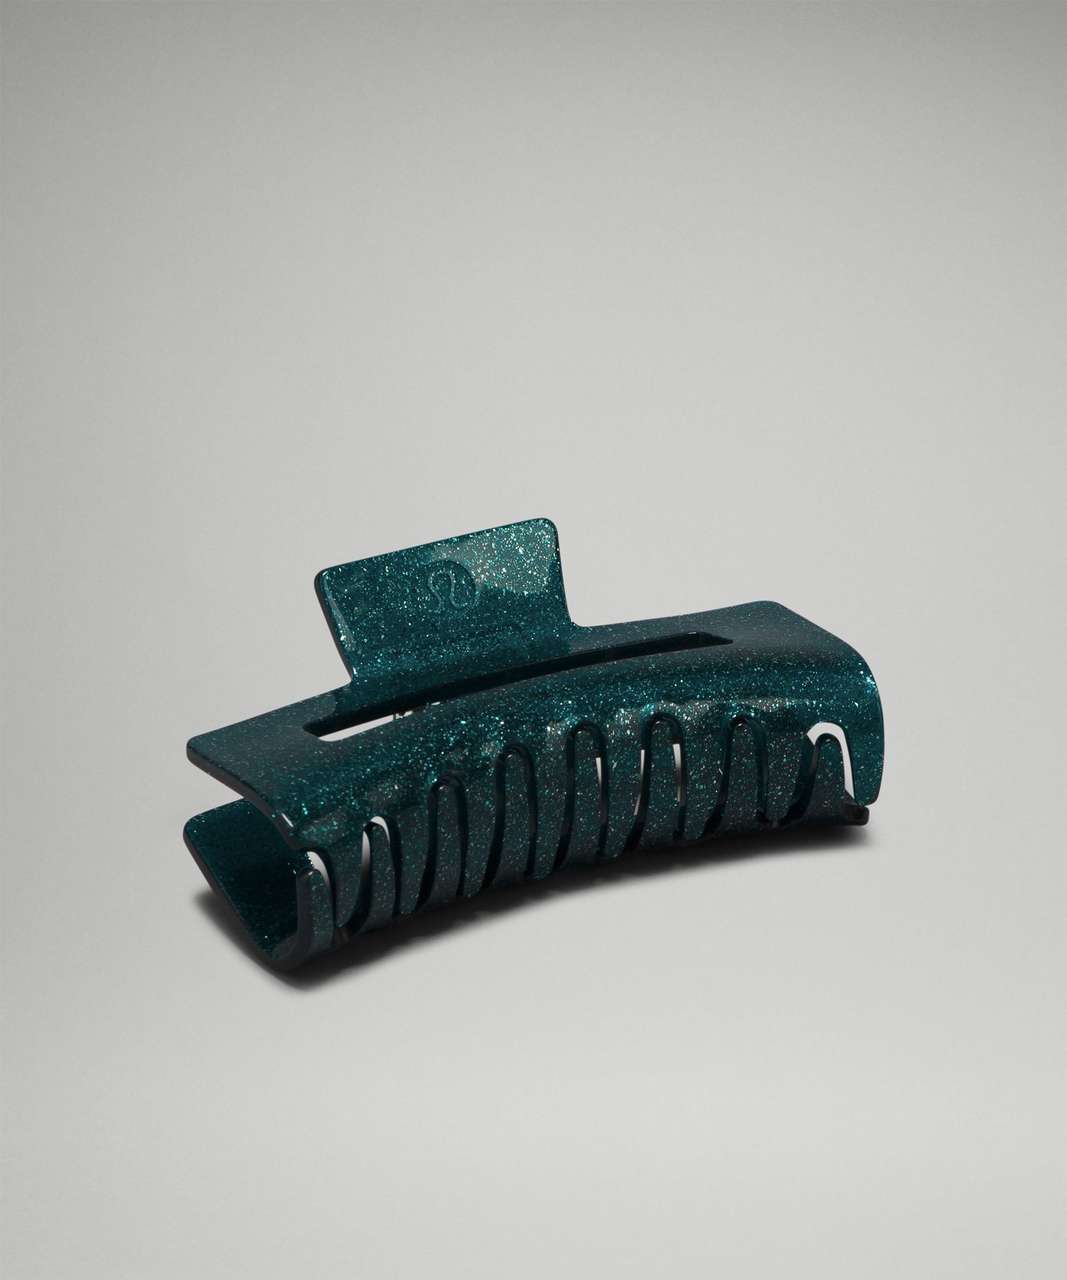 Lululemon Extra Large Claw Hair Clip - Storm Teal / Silver